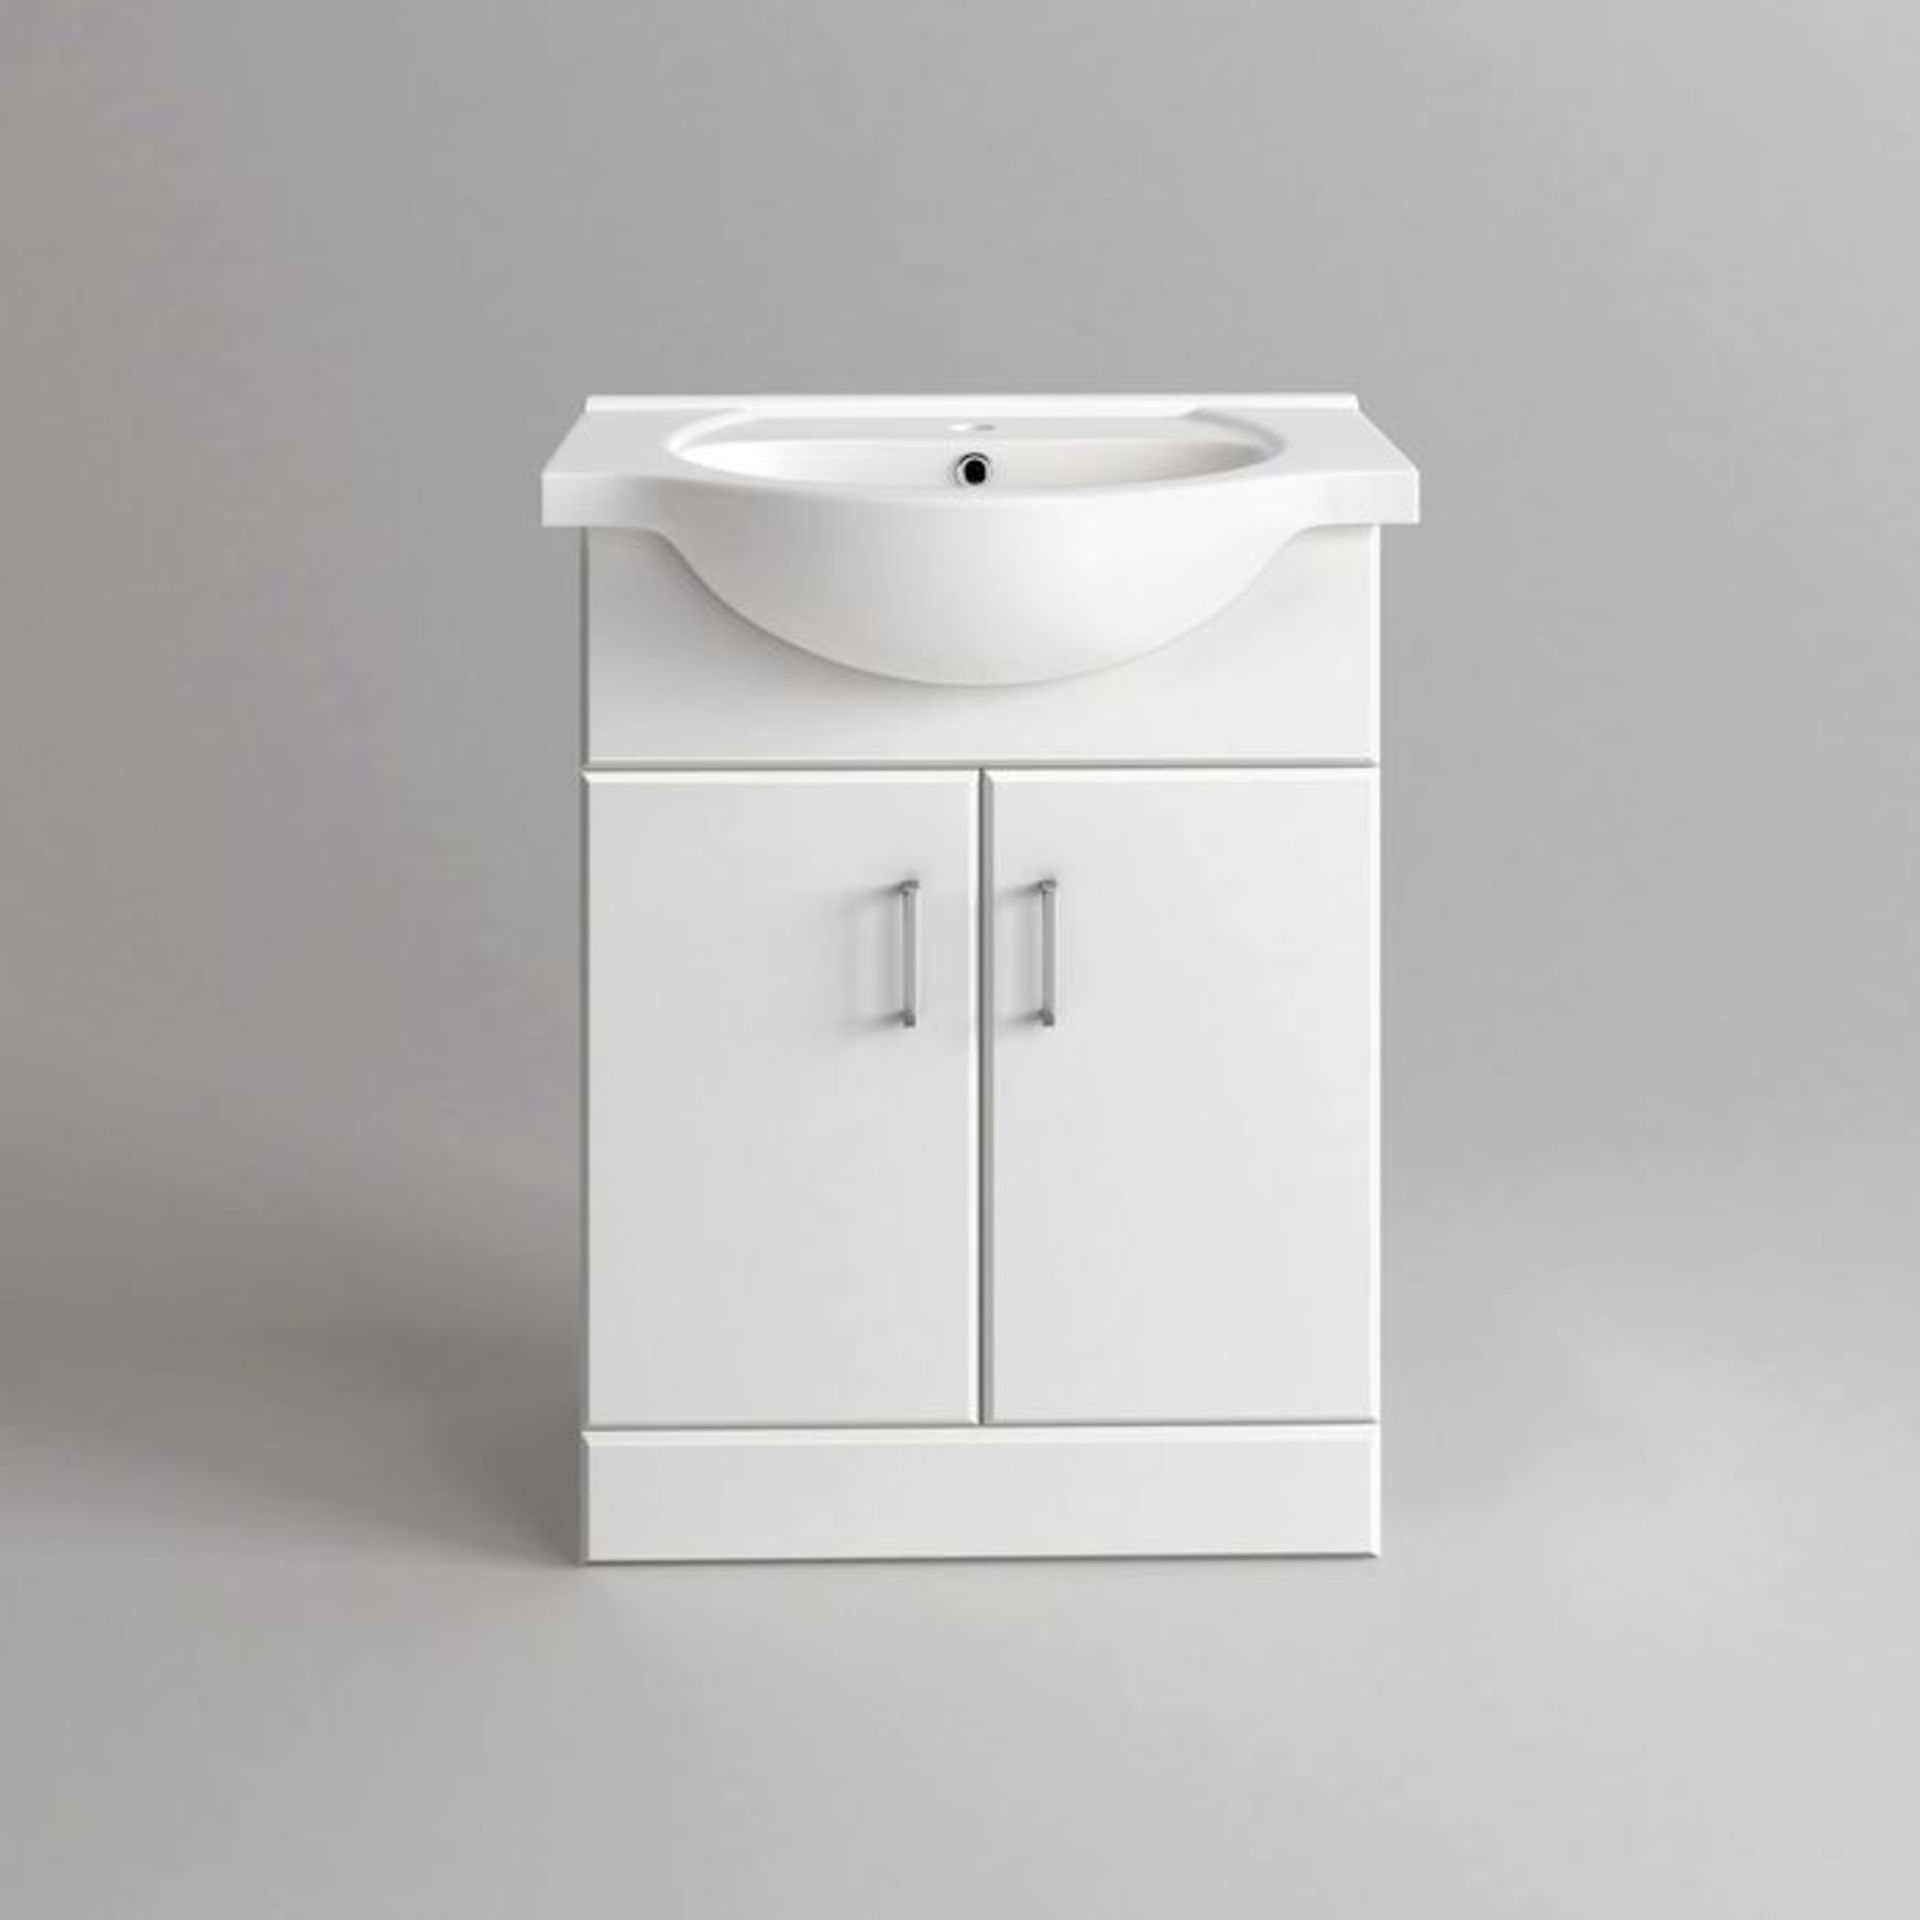 (AL73) 550x300mm Quartz Gloss White Built In Basin Cabinet. RRP £89.99. Comes complete with basin. - Image 5 of 5